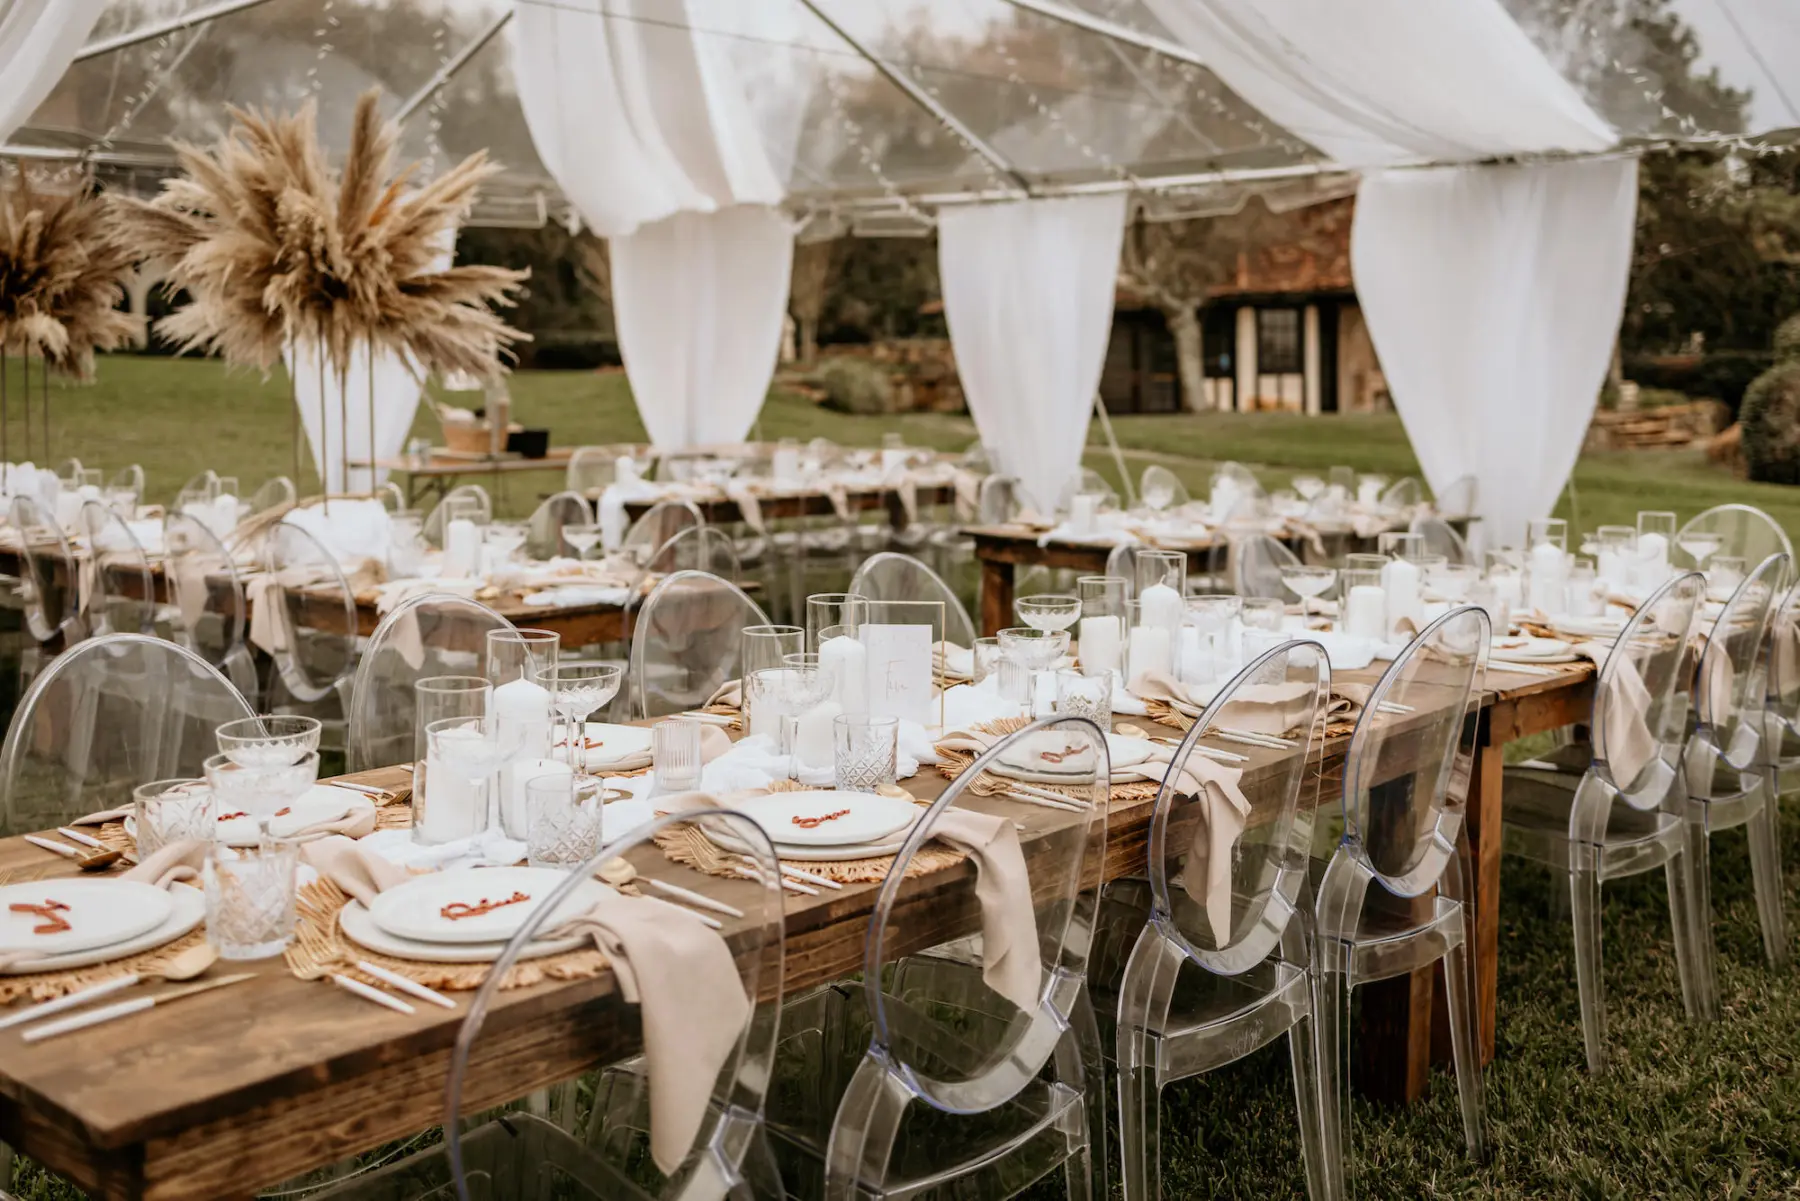 Clear Tented Boho Wedding Reception with Long Feasting Tables and Ghost Chairs Decor Inspiration